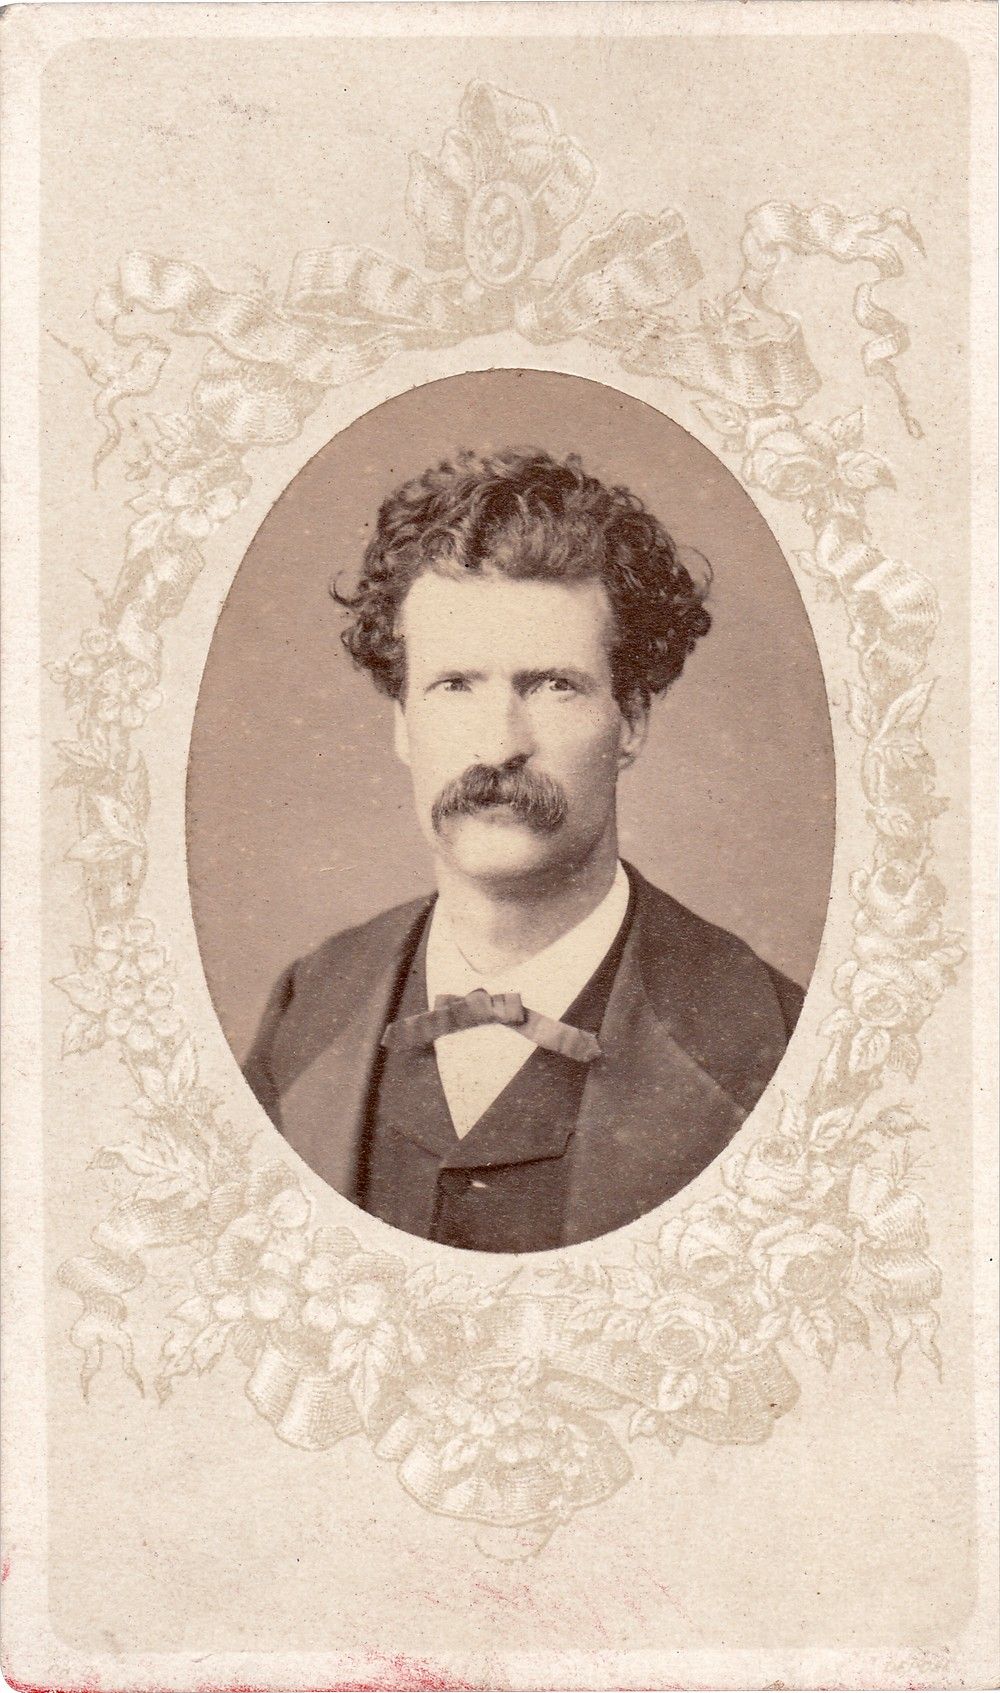 Mark Twain Signed Photo by Abdullah Frères in Constantinople